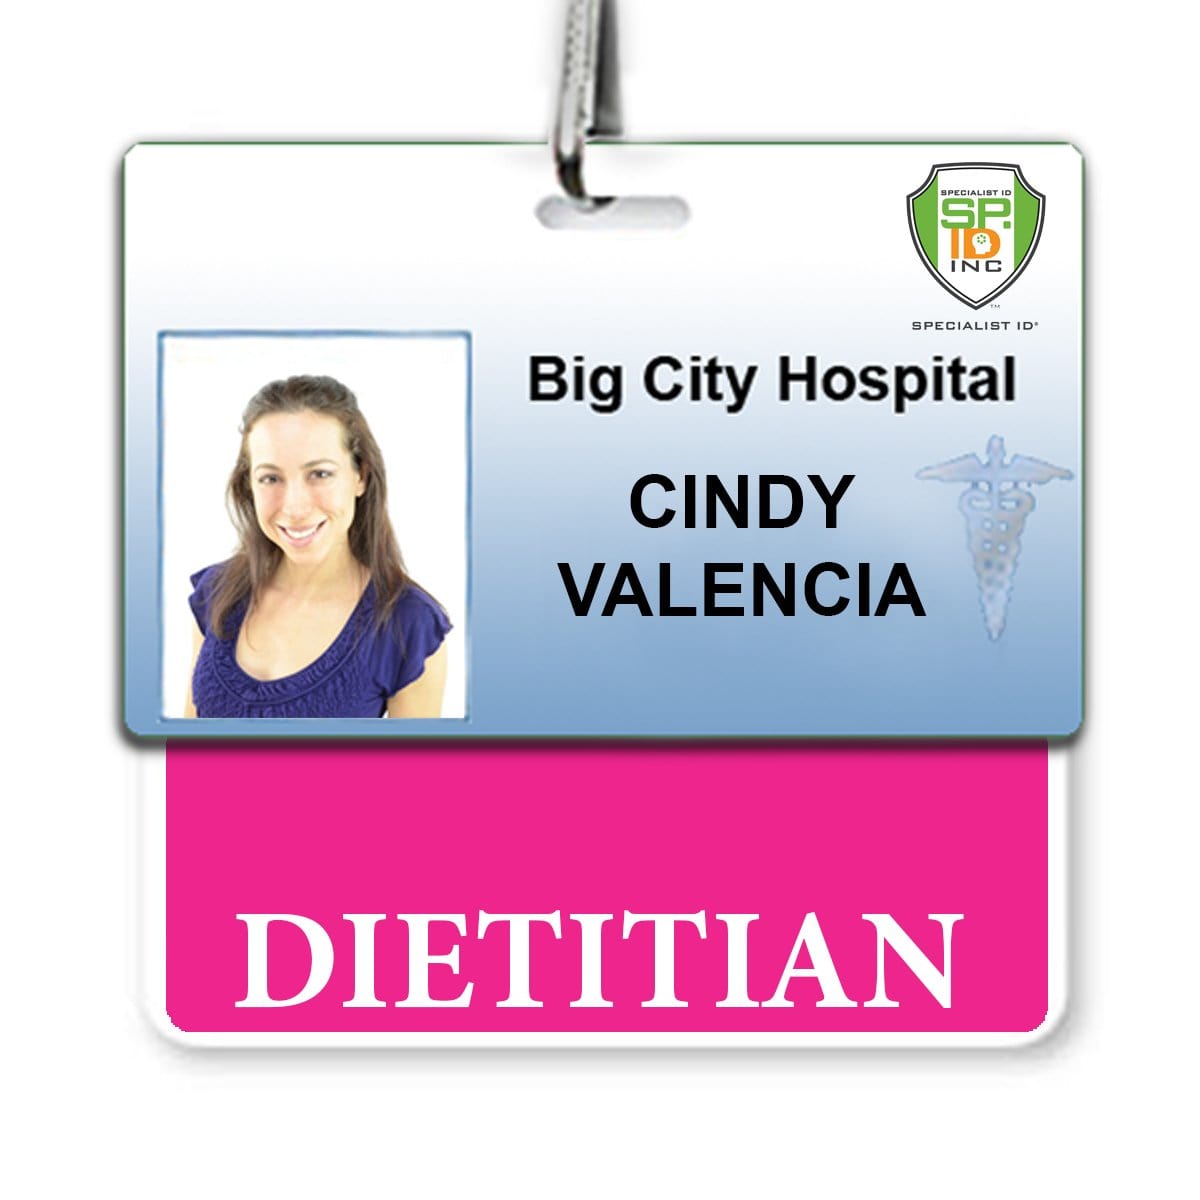 Hot Pink DIETITIAN Badge Buddy with Hot Pink Border - Horizontal BB-DIETITIAN-HOTPINK-H